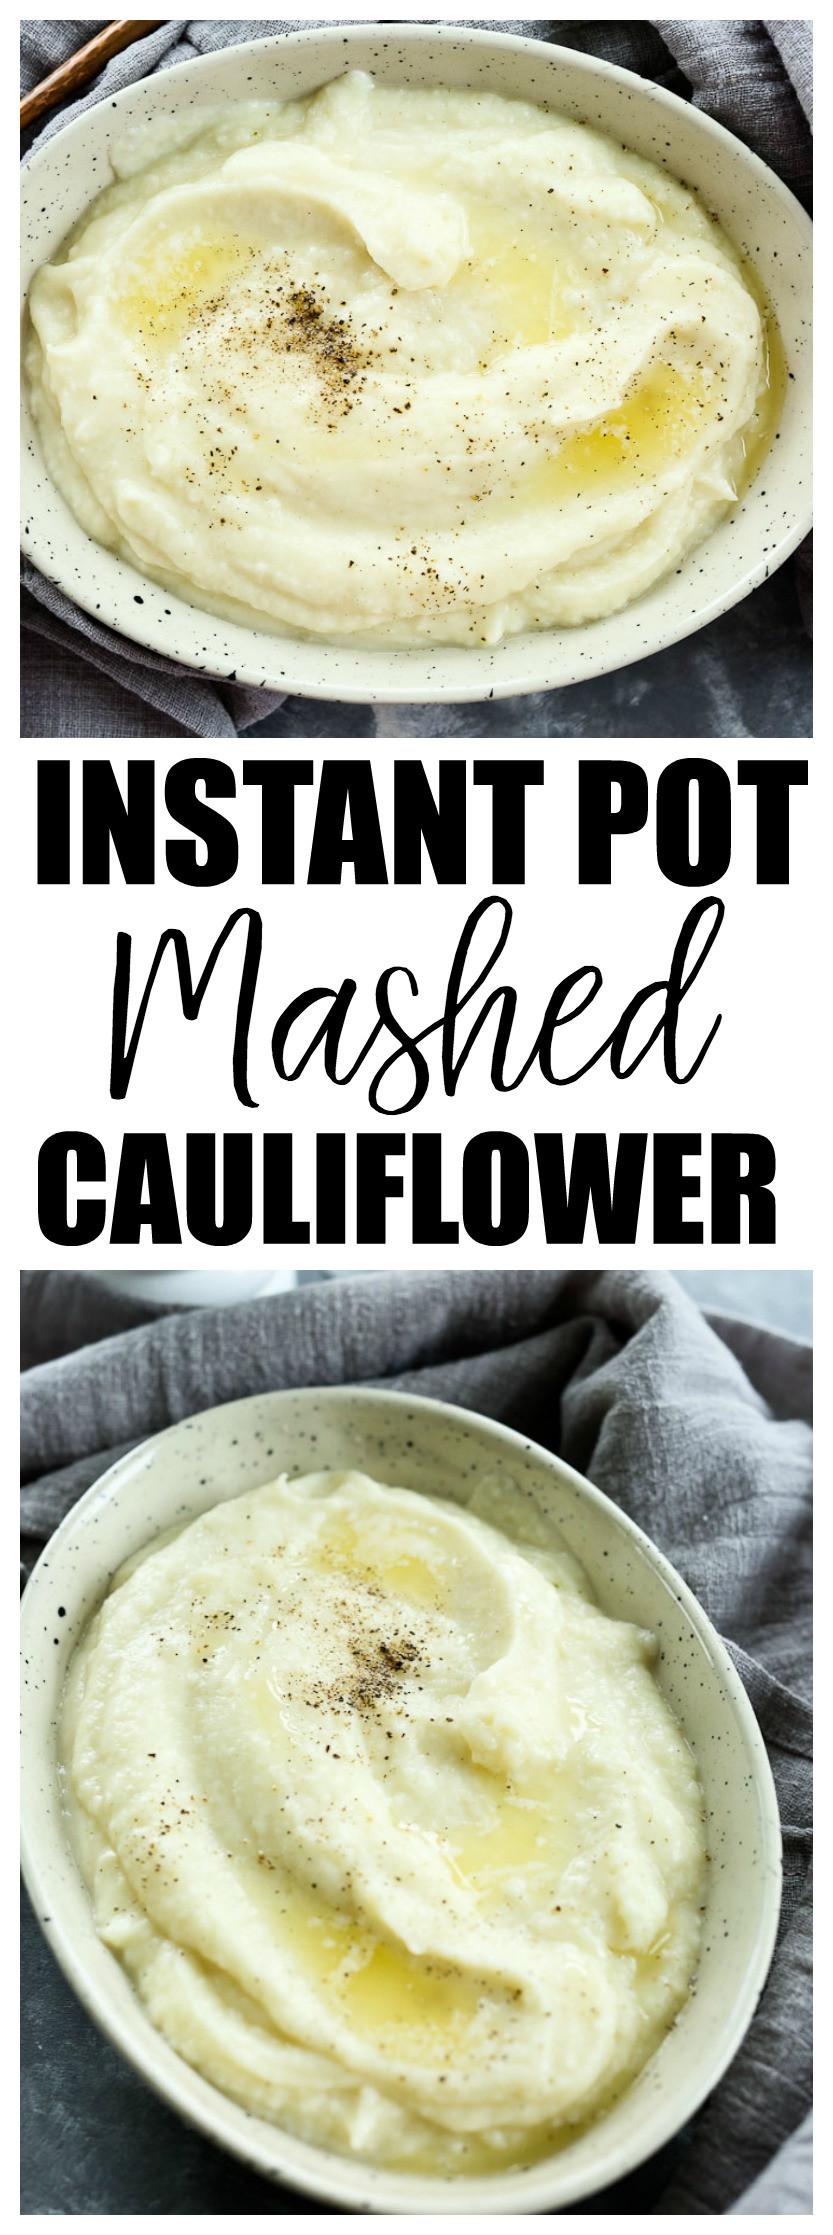 Top Rated Healthy Instant Pot Recipes
 Instant Pot Mashed Cauliflower Happy Healthy Mama